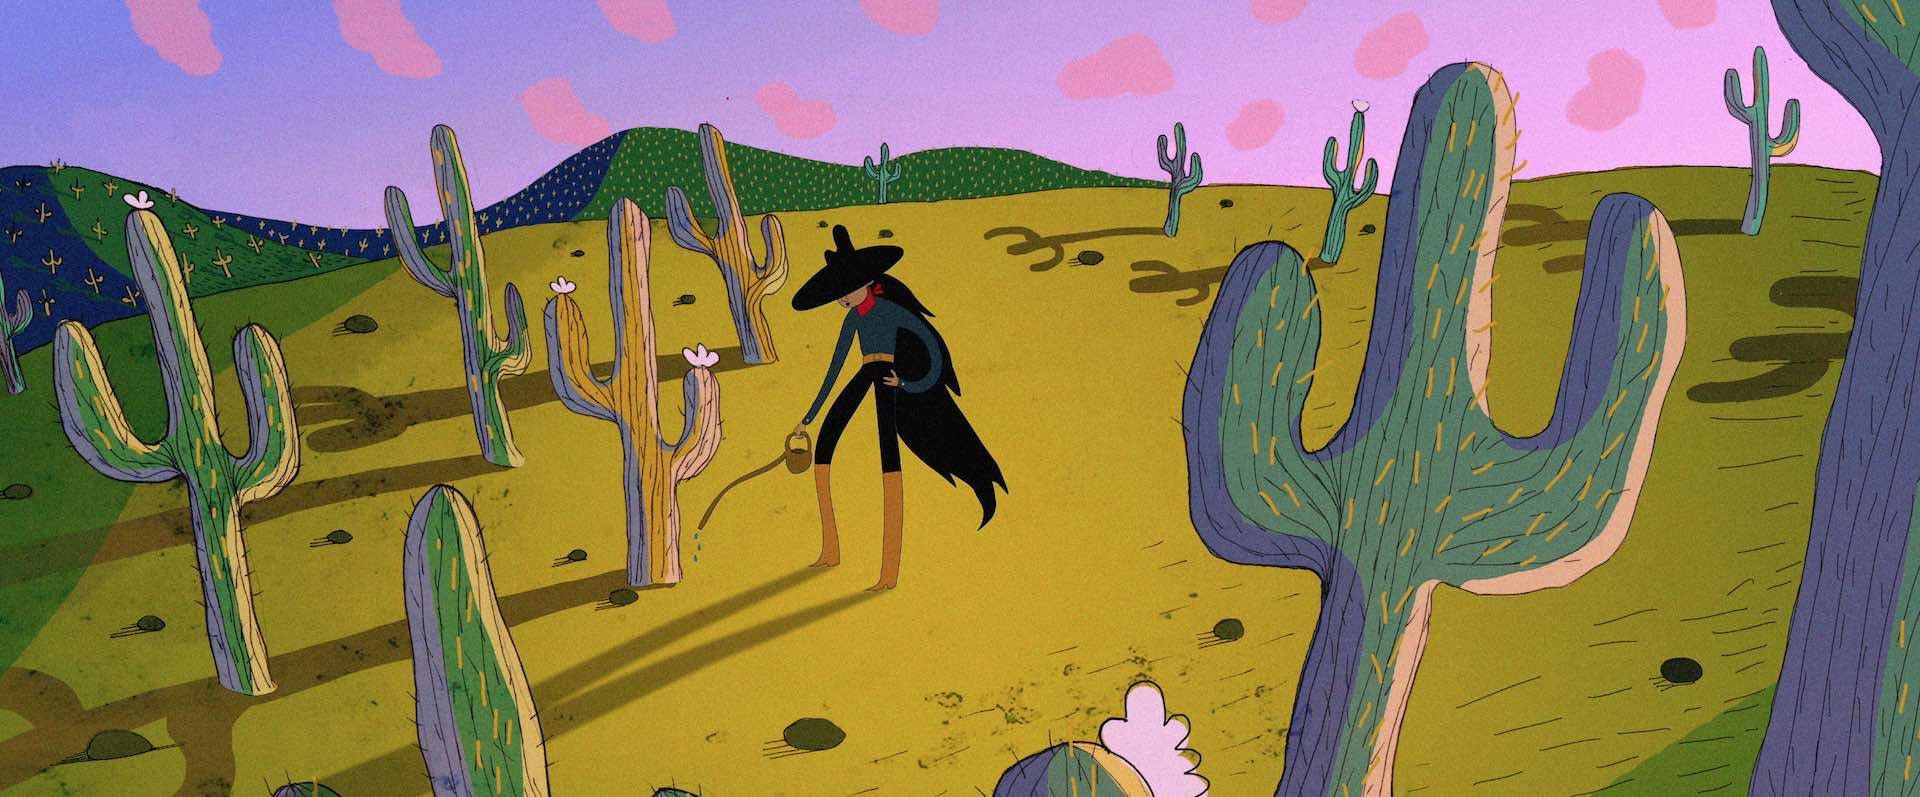 A figure in a cowboy hat waters a cactus in a colourful desert landscape